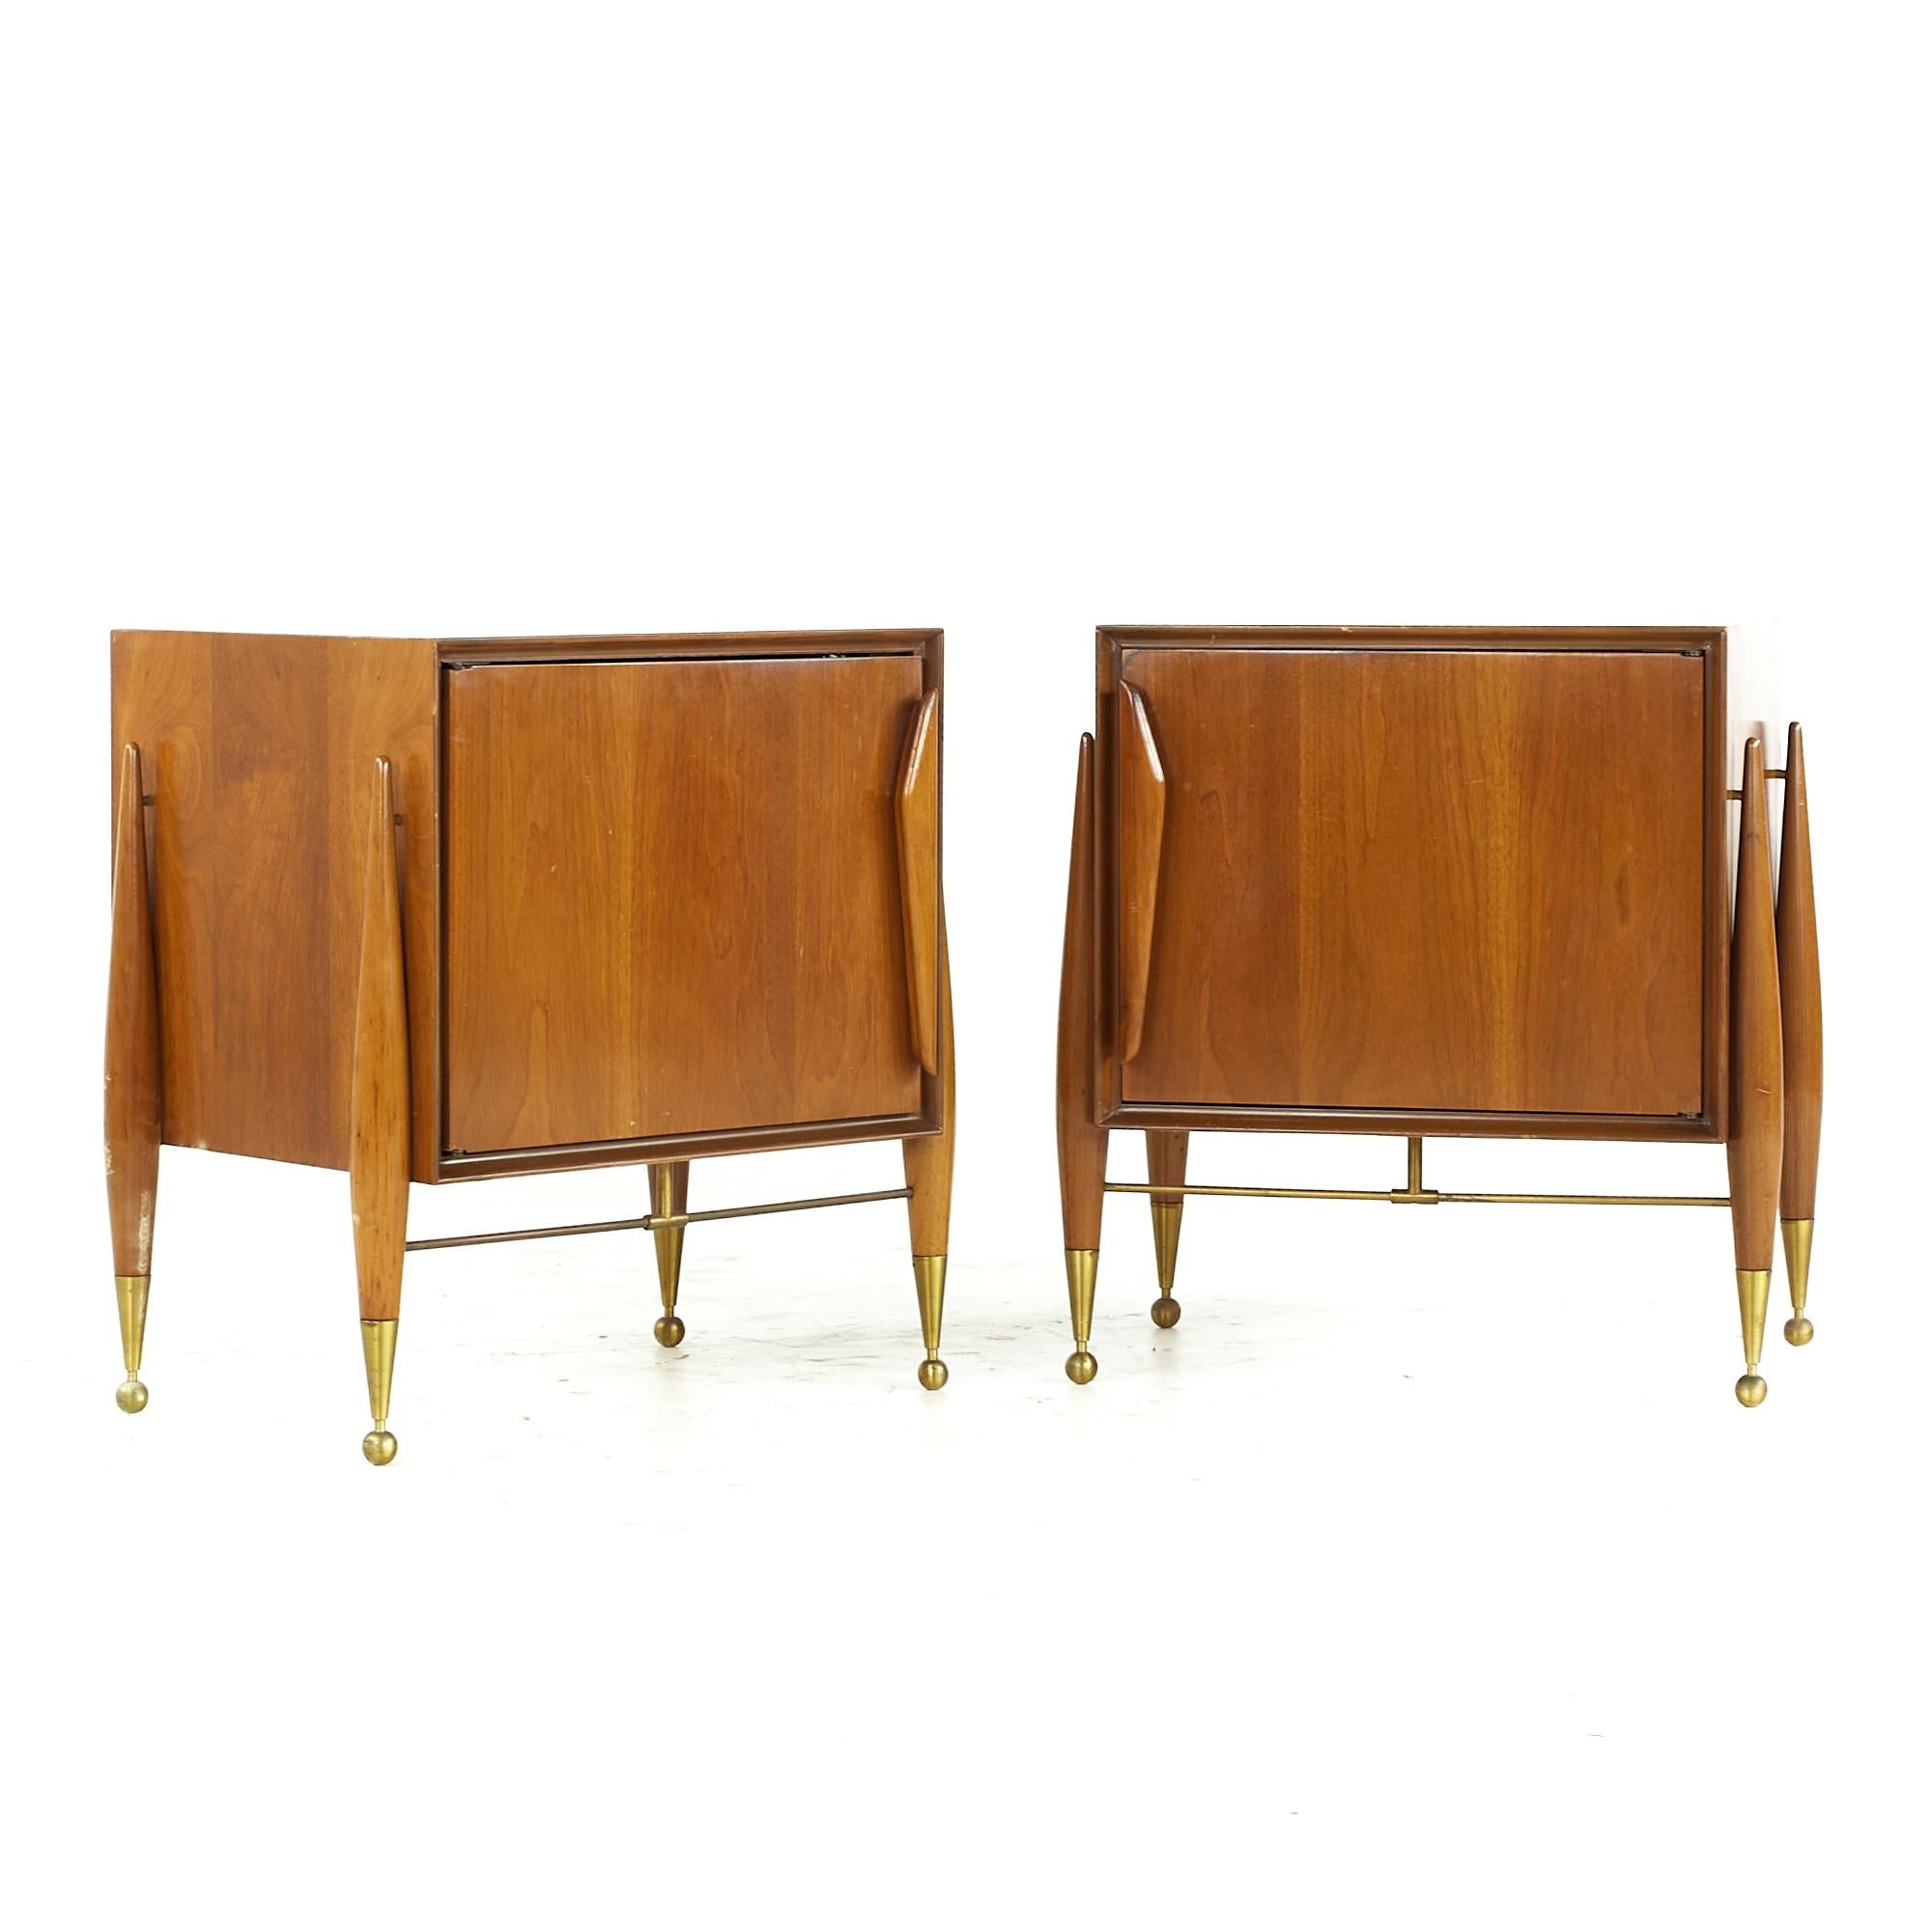 Gio Ponti Style midcentury Walnut and Brass Nightstand - Pair

Each nightstand measures: 23.25 wide x 17 deep x 24.5 inches high

All pieces of furniture can be had in what we call restored vintage condition. That means the piece is restored